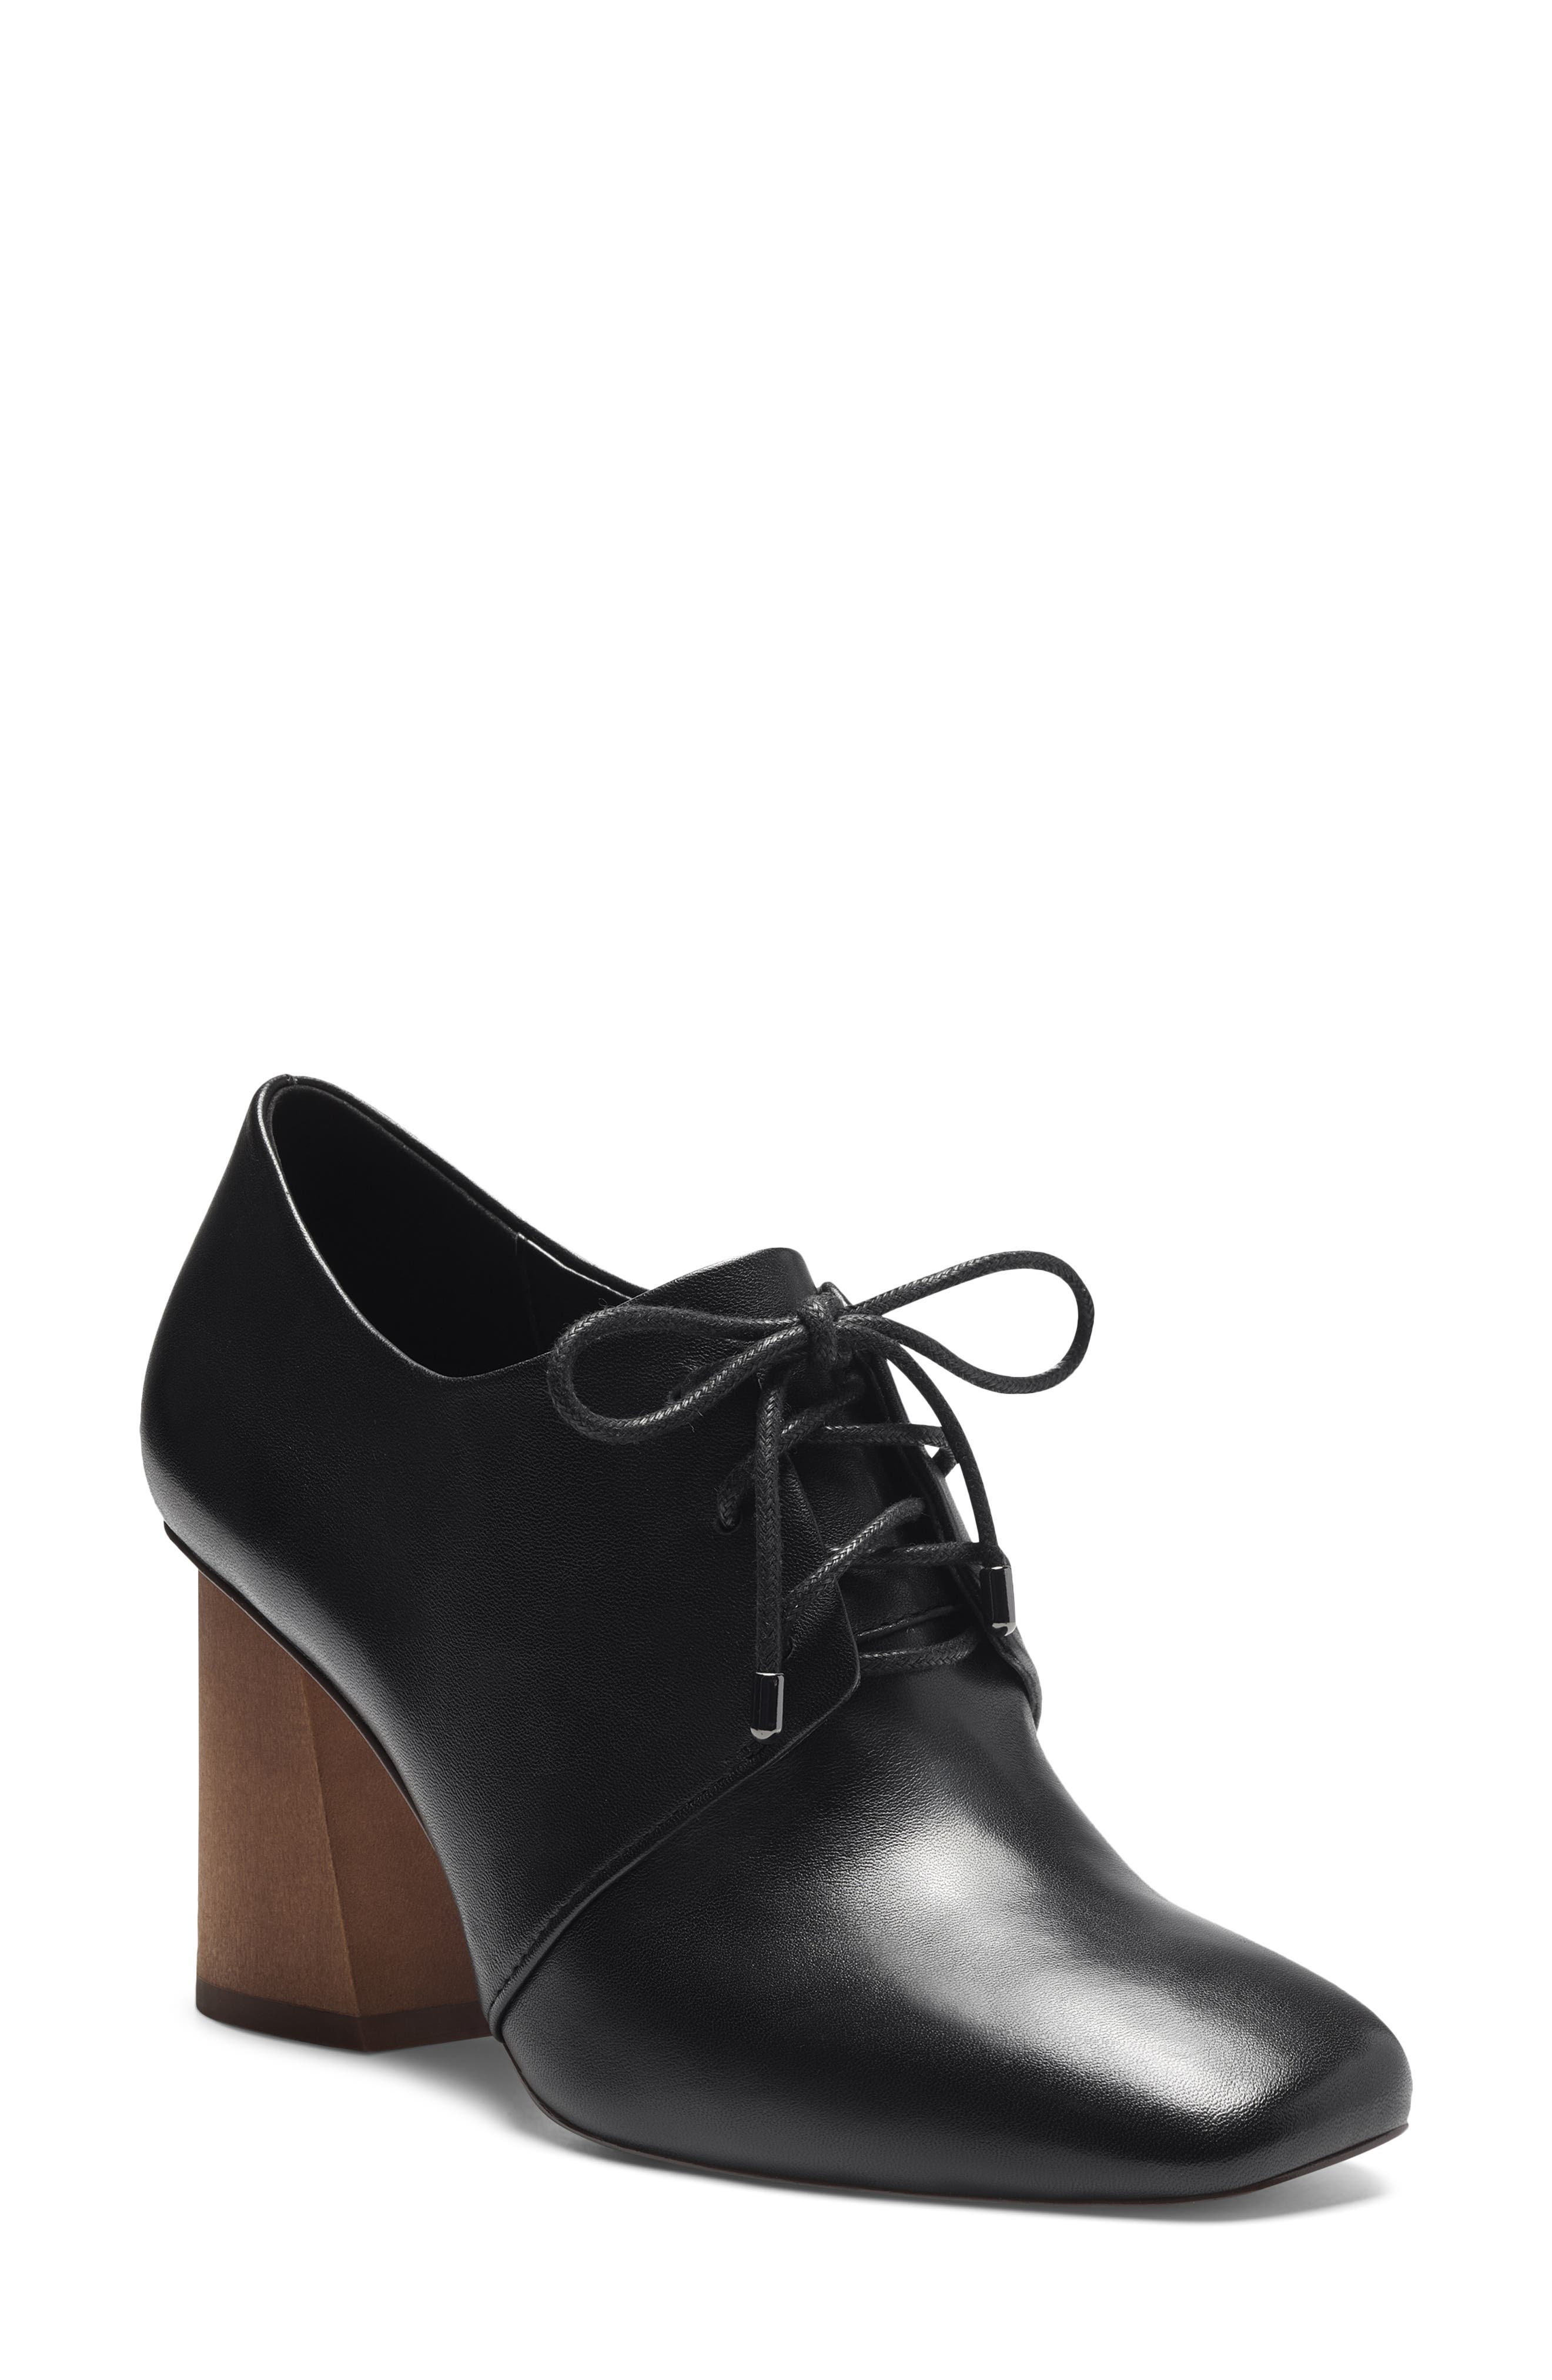 Oxfords Vince Camuto Shoes | Nordstrom